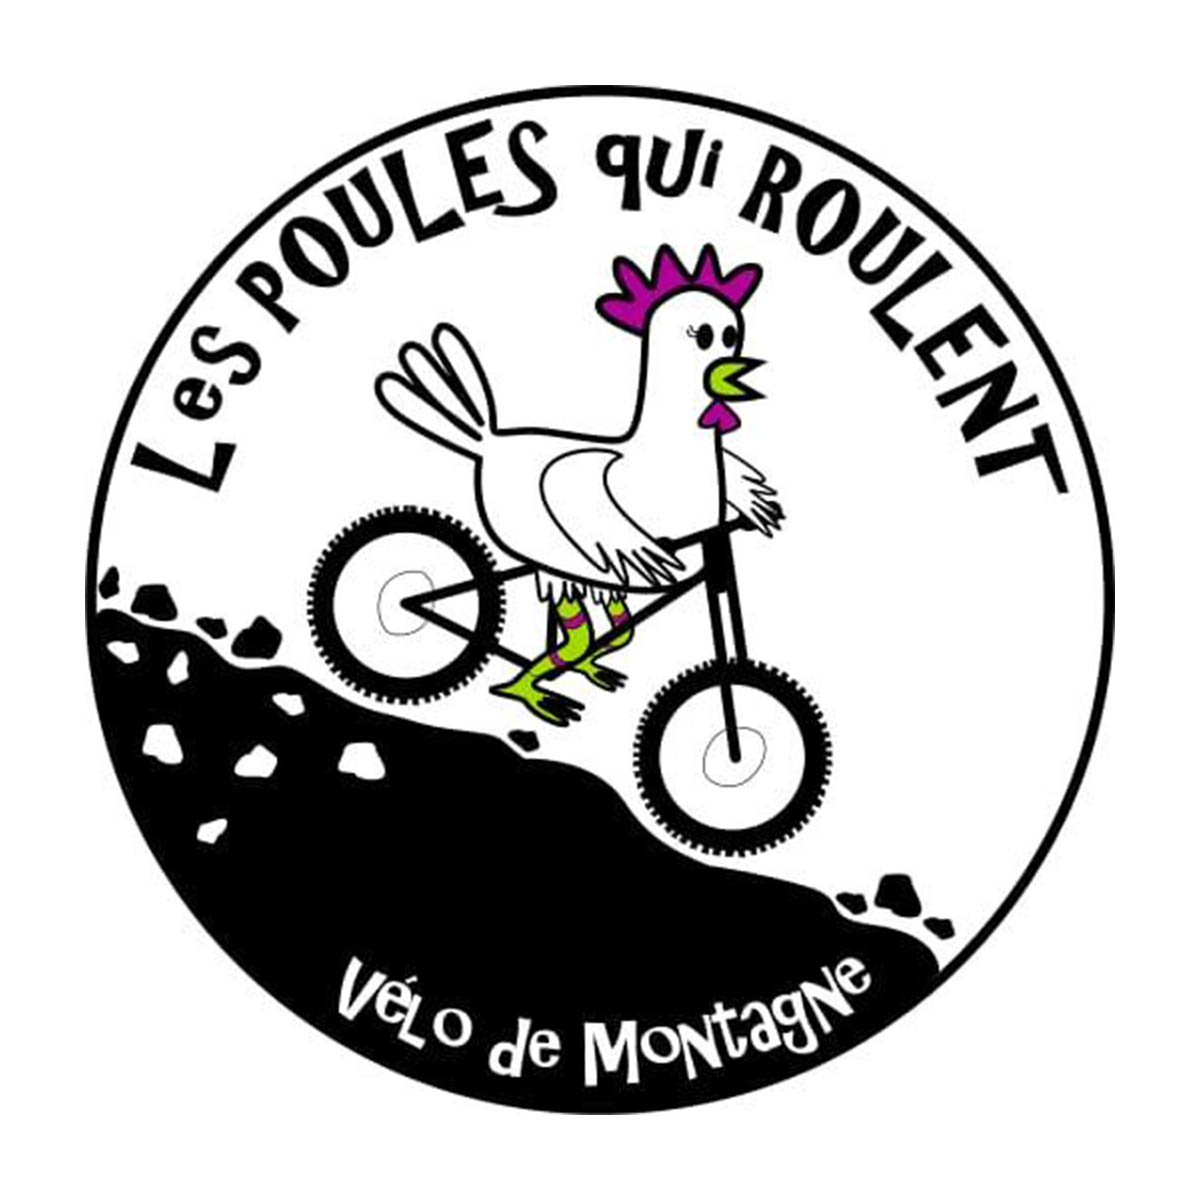 1-_0003_Logo_Poules_NTg5ND